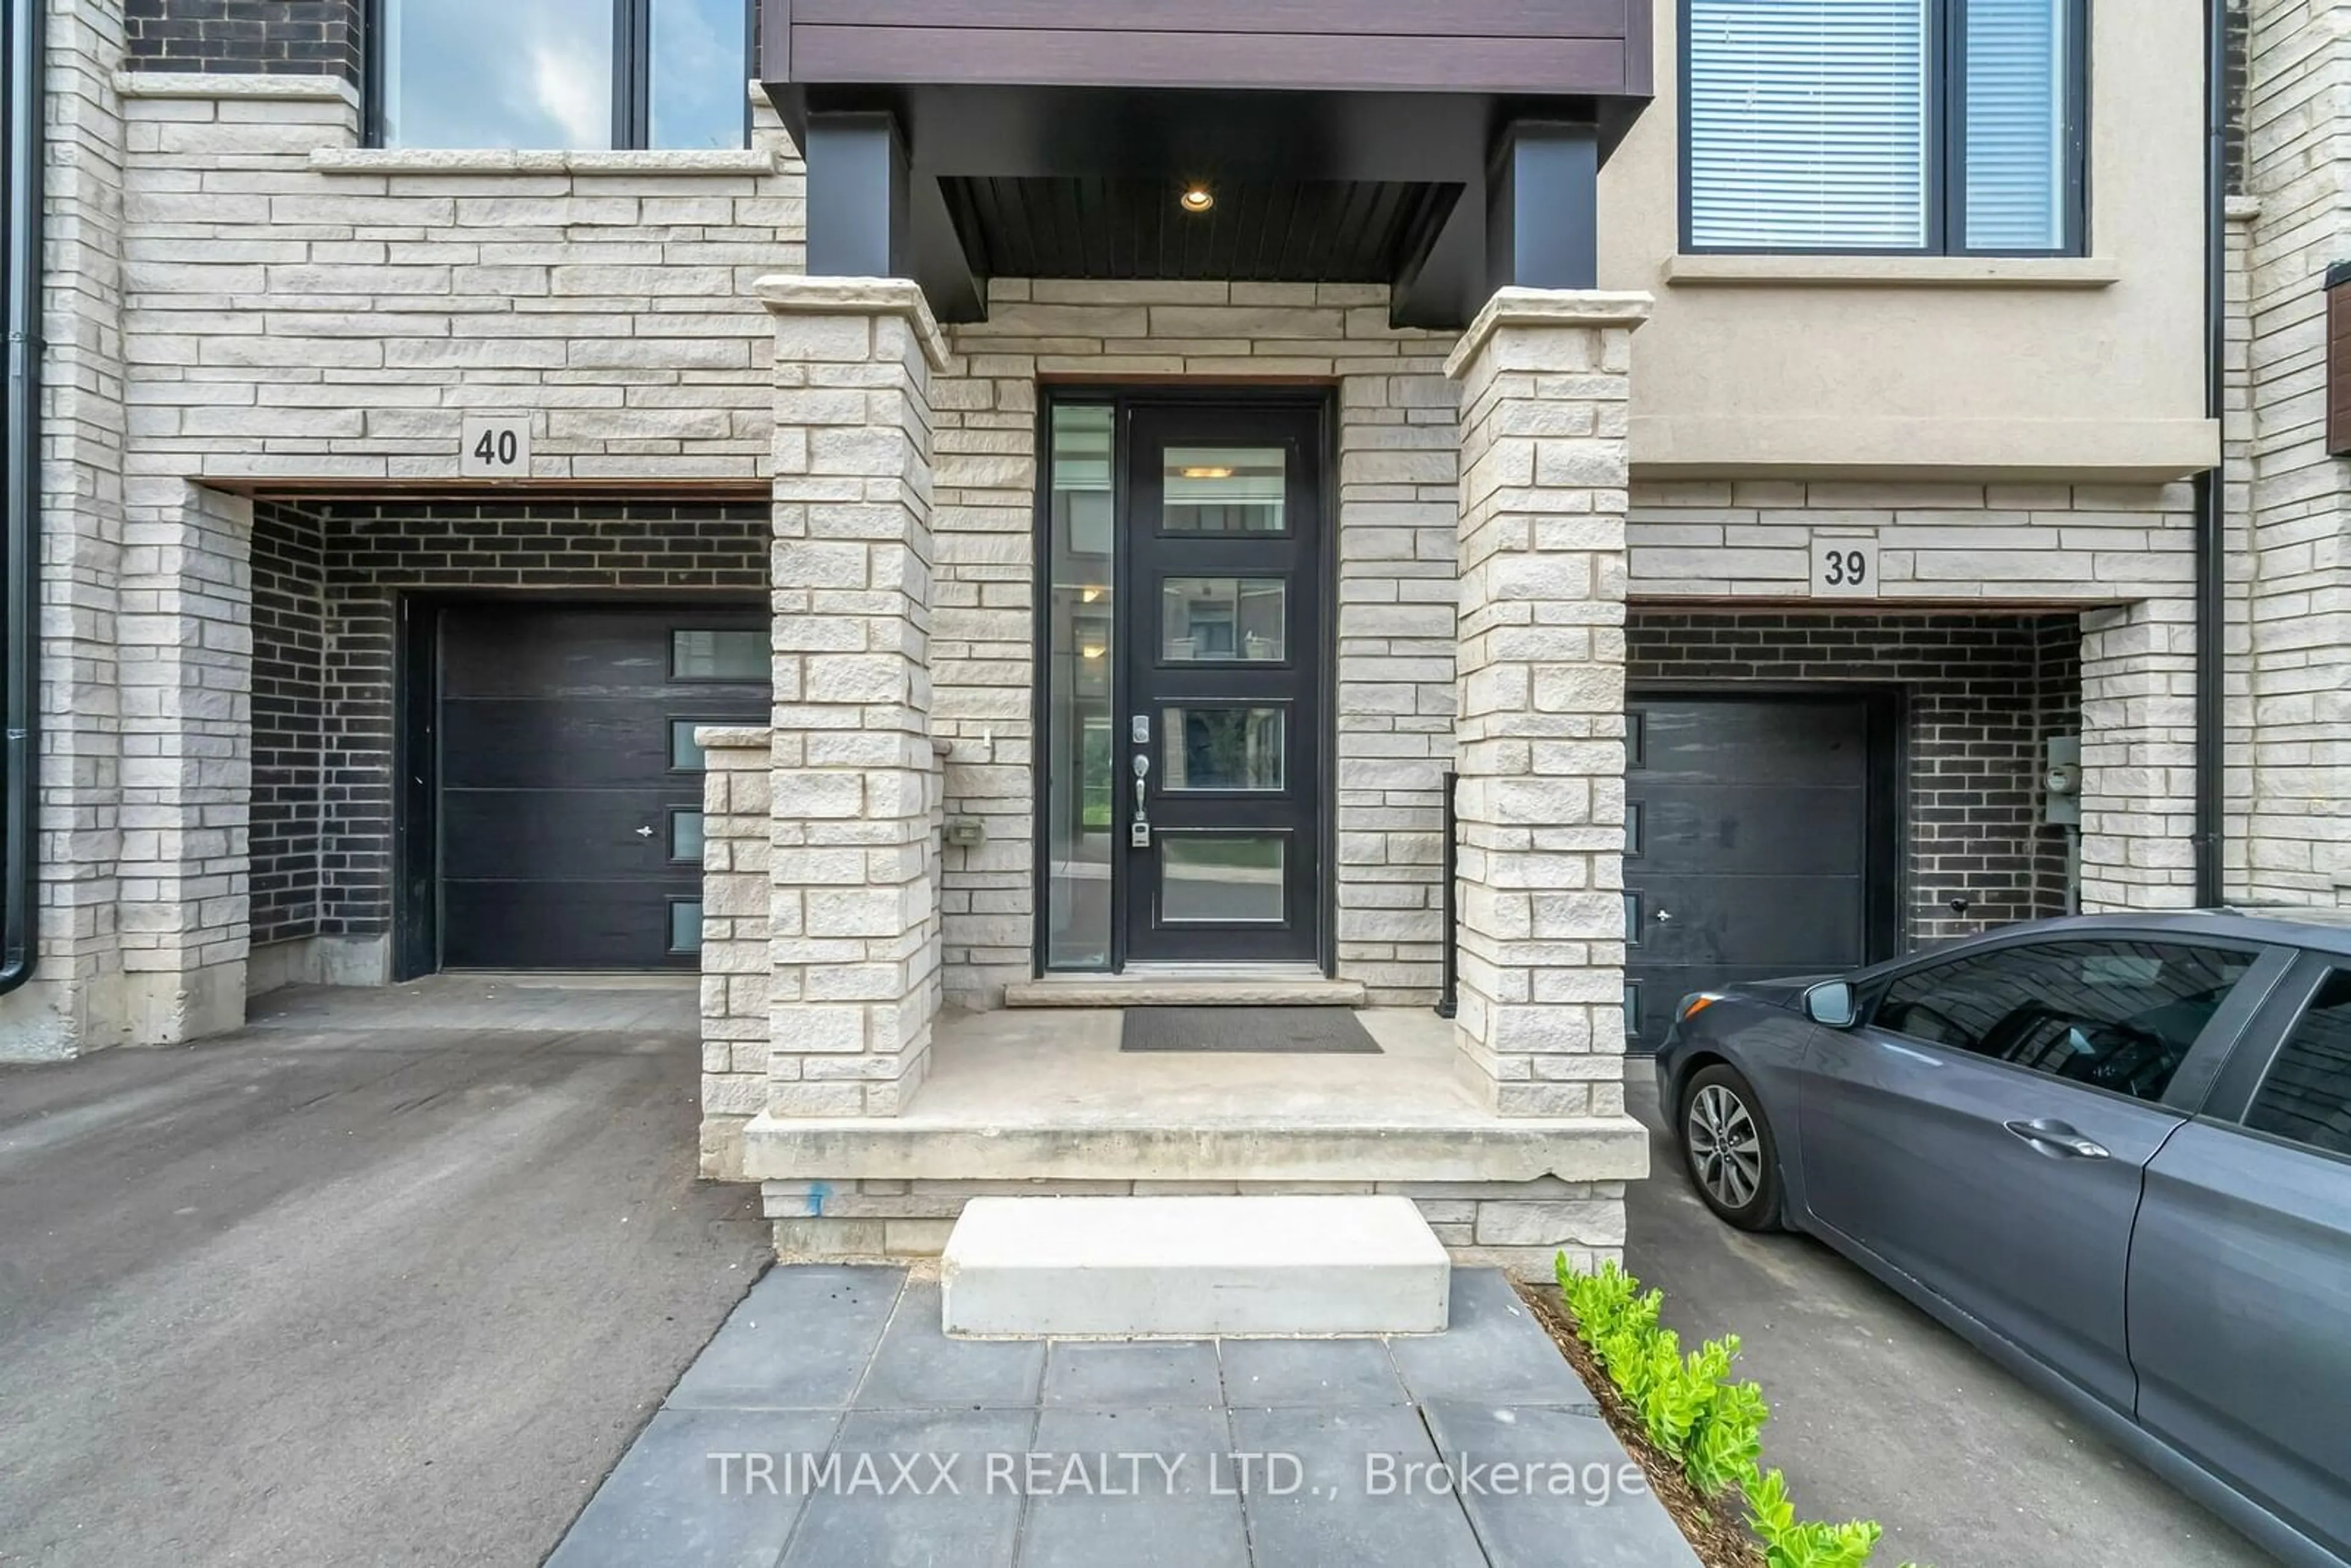 Home with brick exterior material for 290 EQUESTRIAN Way #40, Cambridge Ontario N3H 4R6